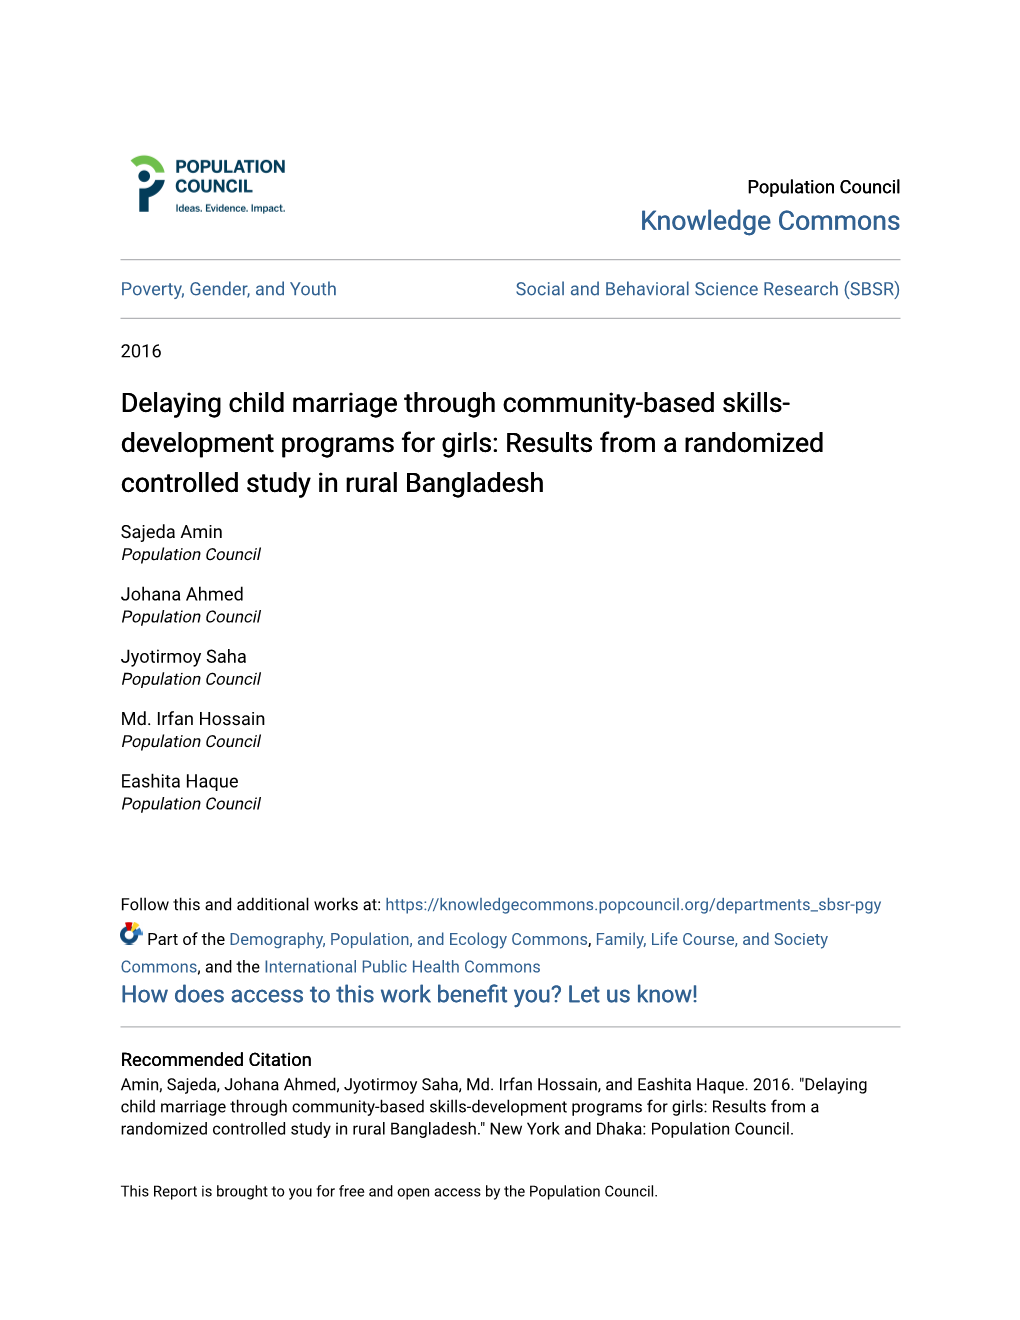 Delaying Child Marriage Through Community-Based Skills- Development Programs for Girls: Results from a Randomized Controlled Study in Rural Bangladesh